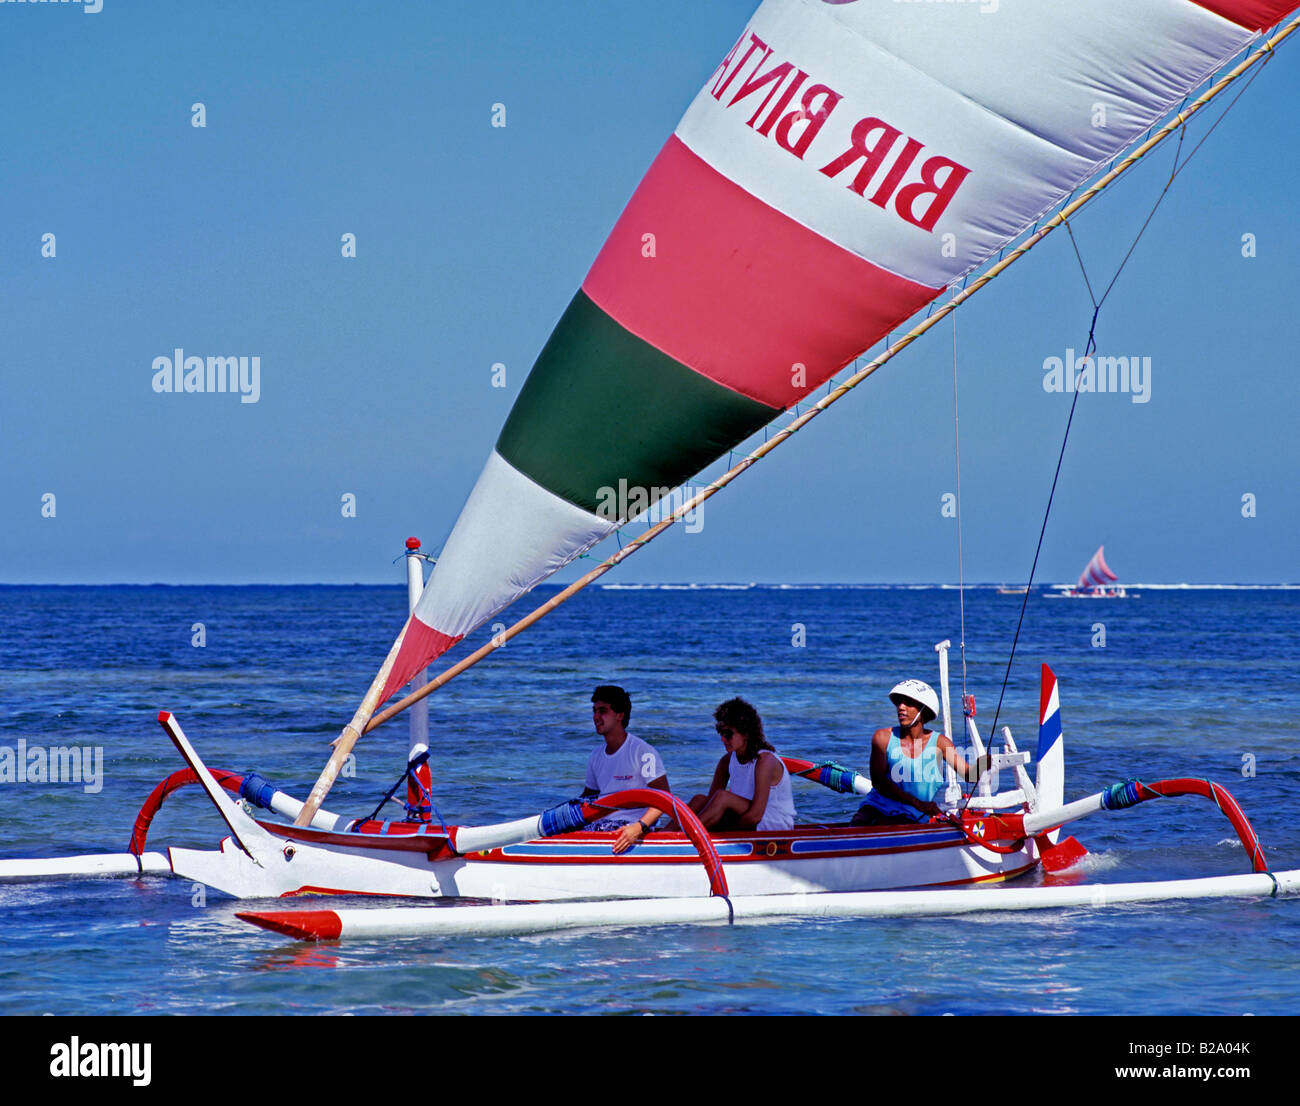 Outrigger boat Bali Indonesia Date 28 03 2008 Ref WP B548 111653 0052 COMPULSORY CREDIT World Pictures Photoshot Stock Photo